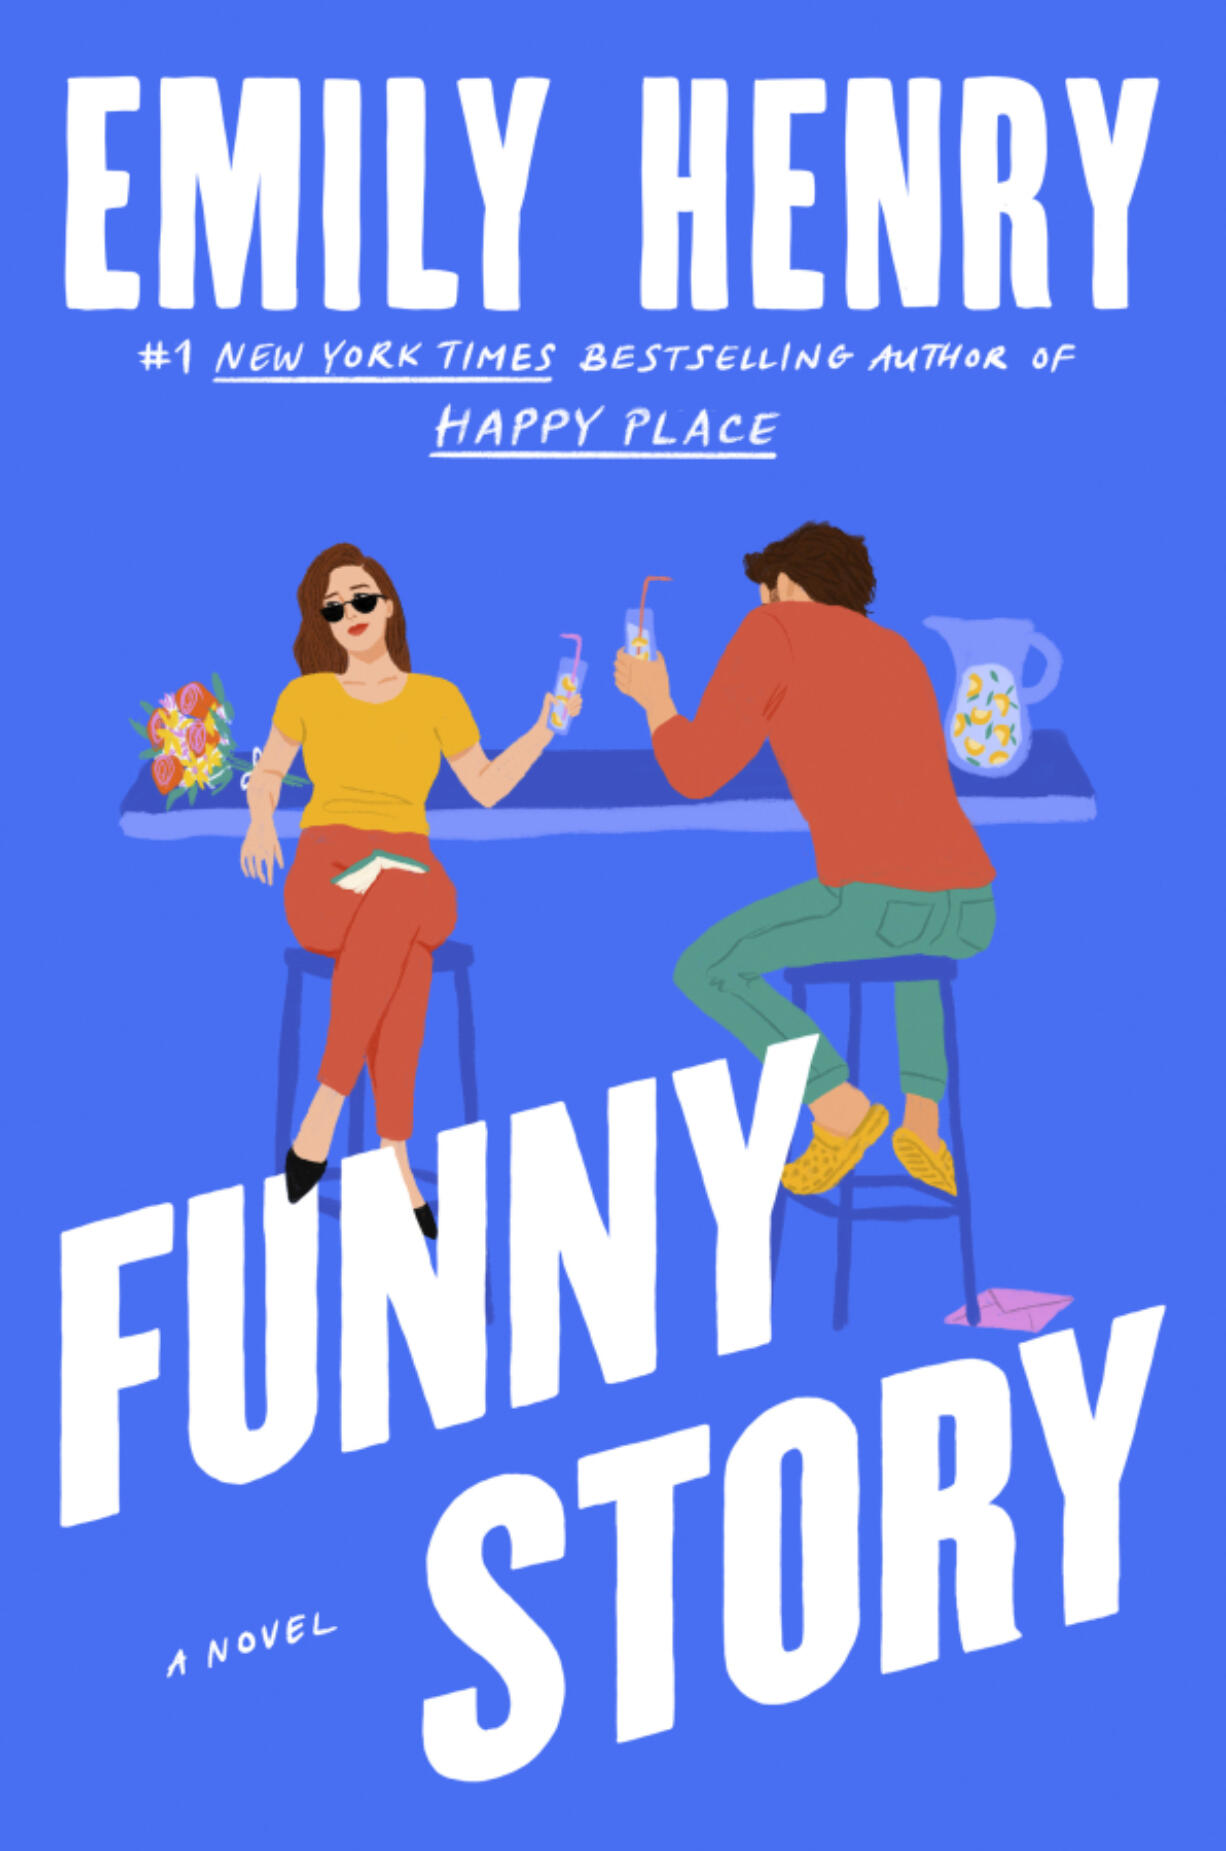 &ldquo;Funny Story&rdquo; by Emily Henry (Andy Kropa/Invision)